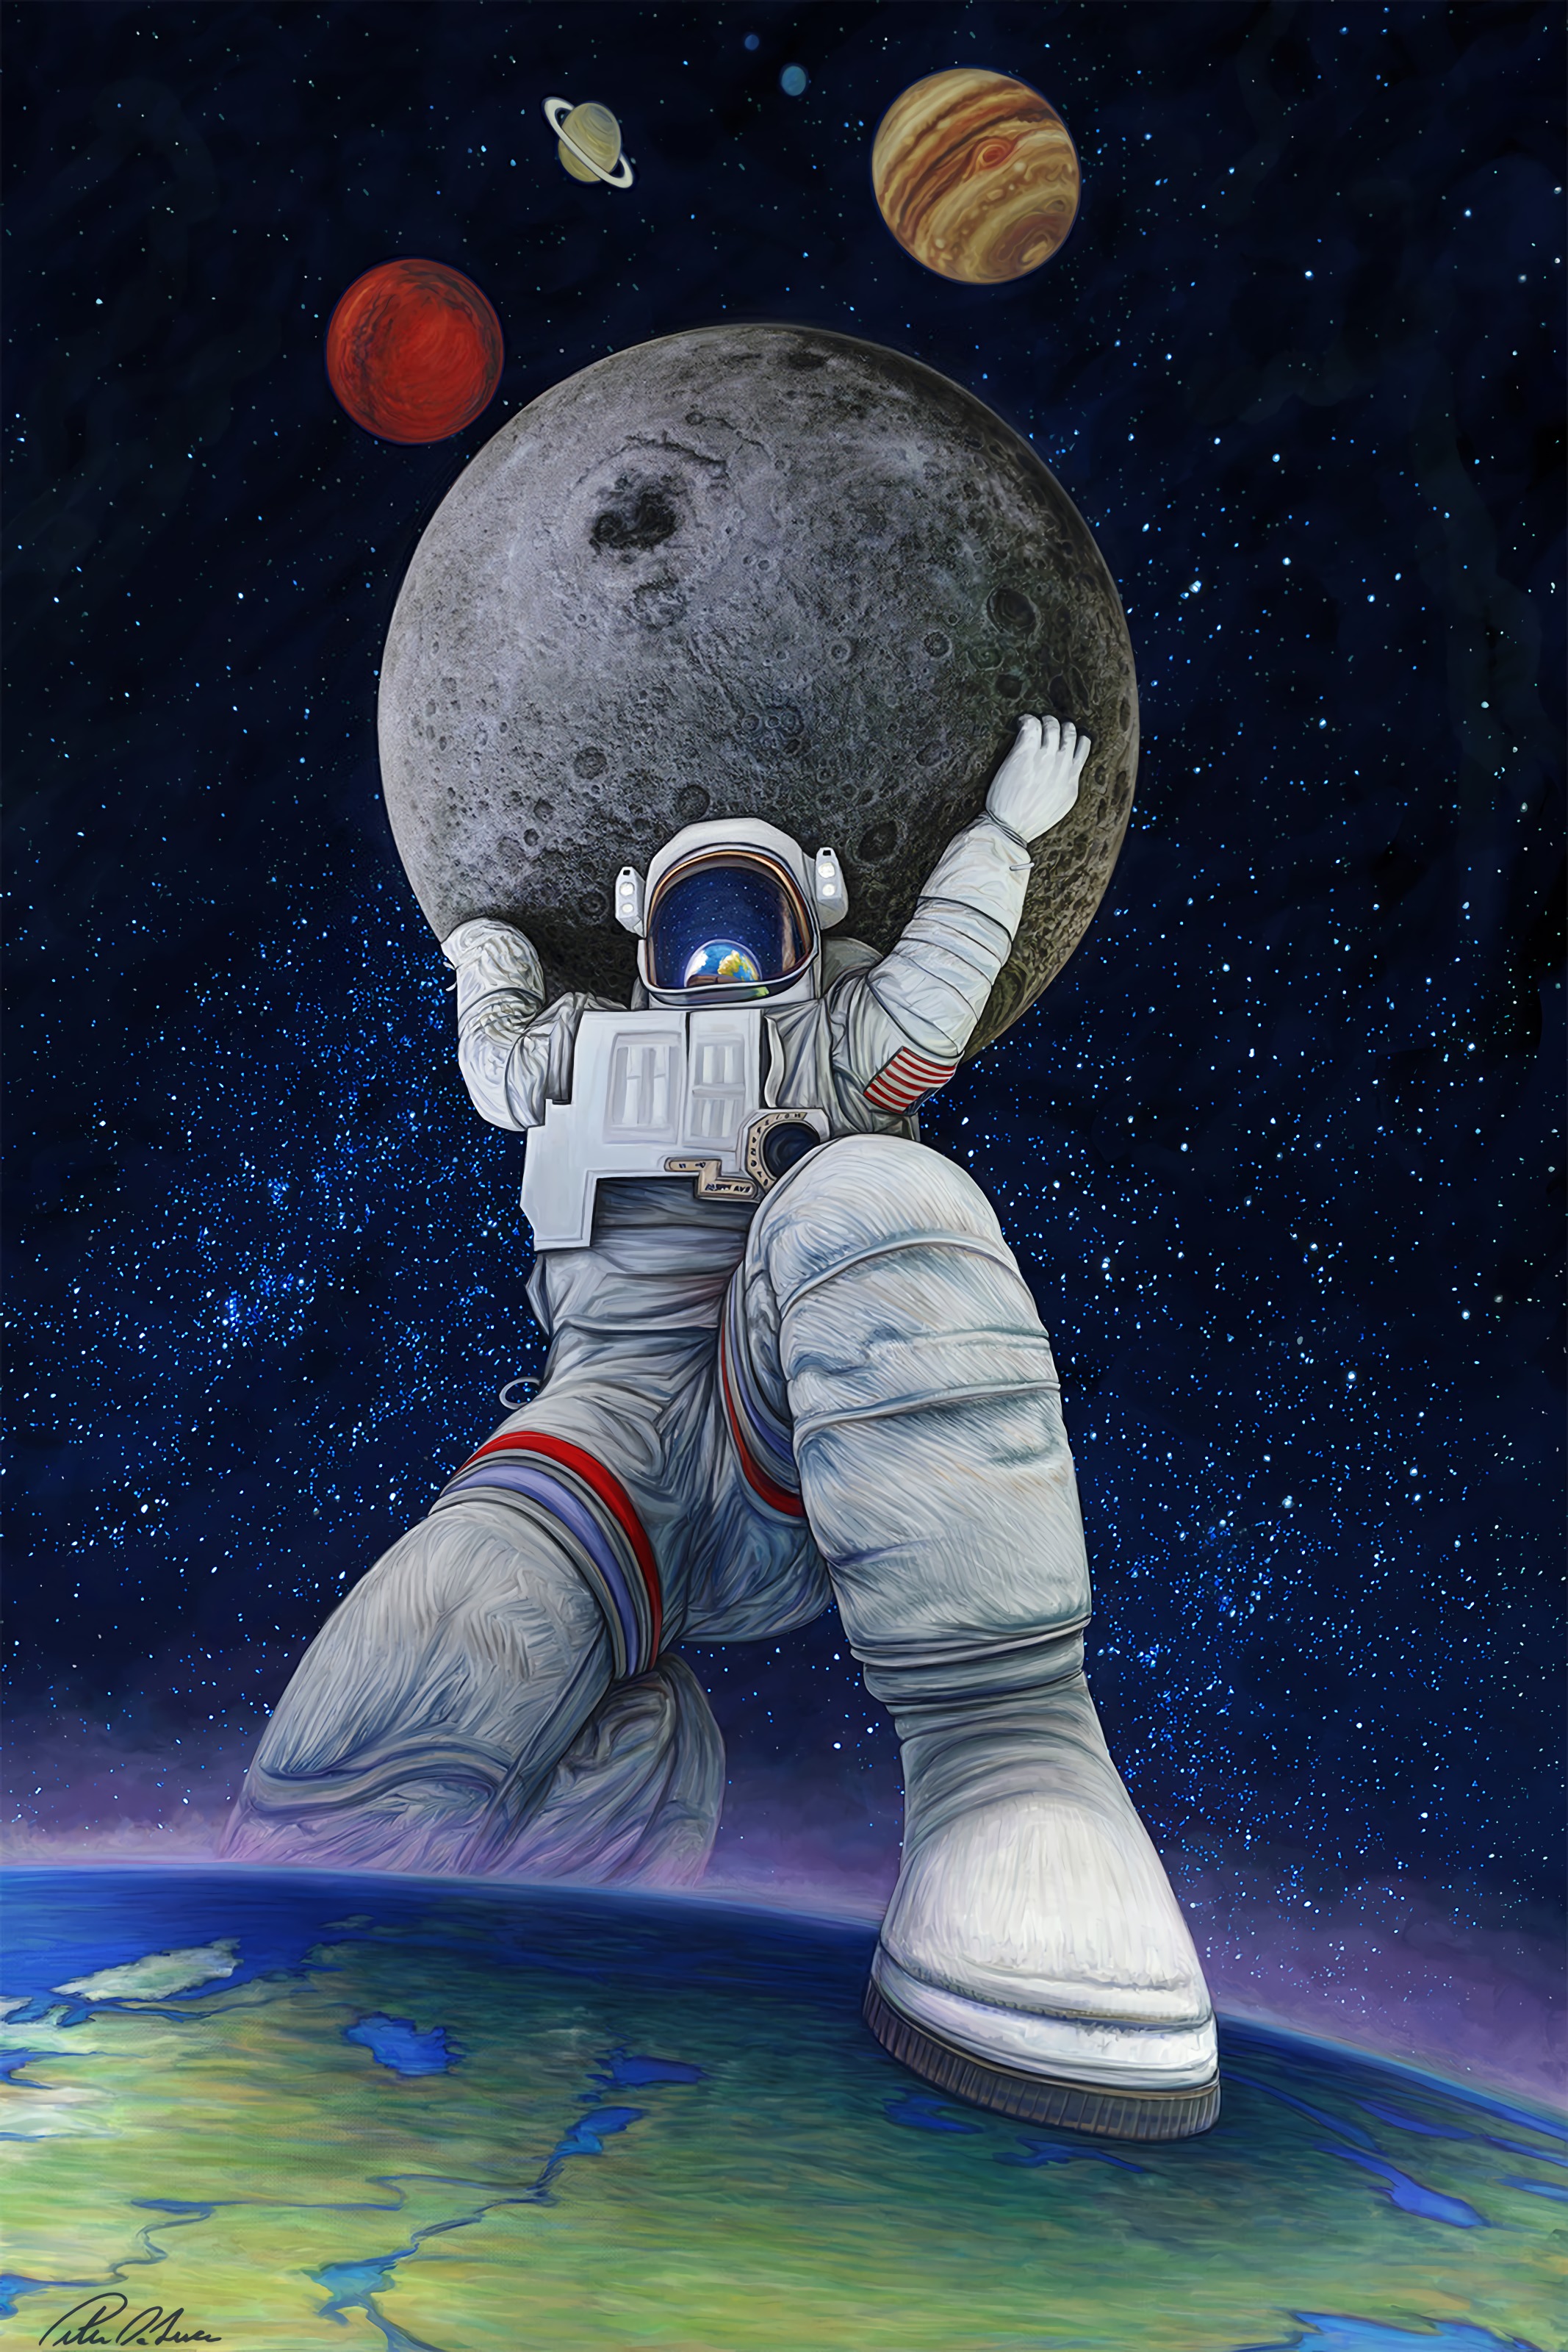 wallpapers art, planets, giant, universe, astronaut